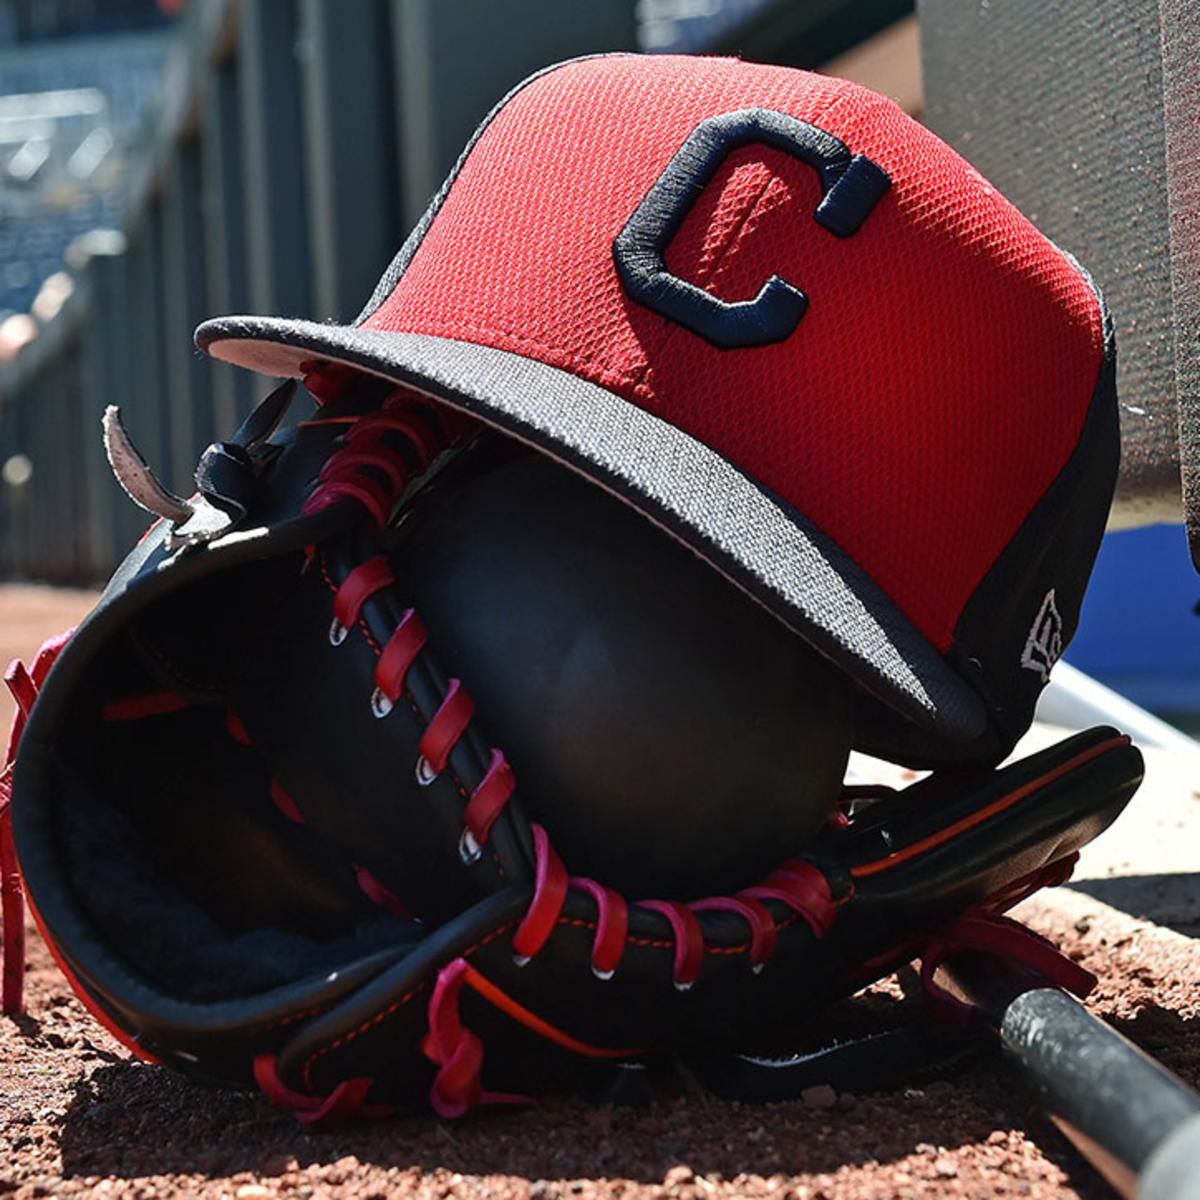 Cleveland Indians changing name to Cleveland Guardians